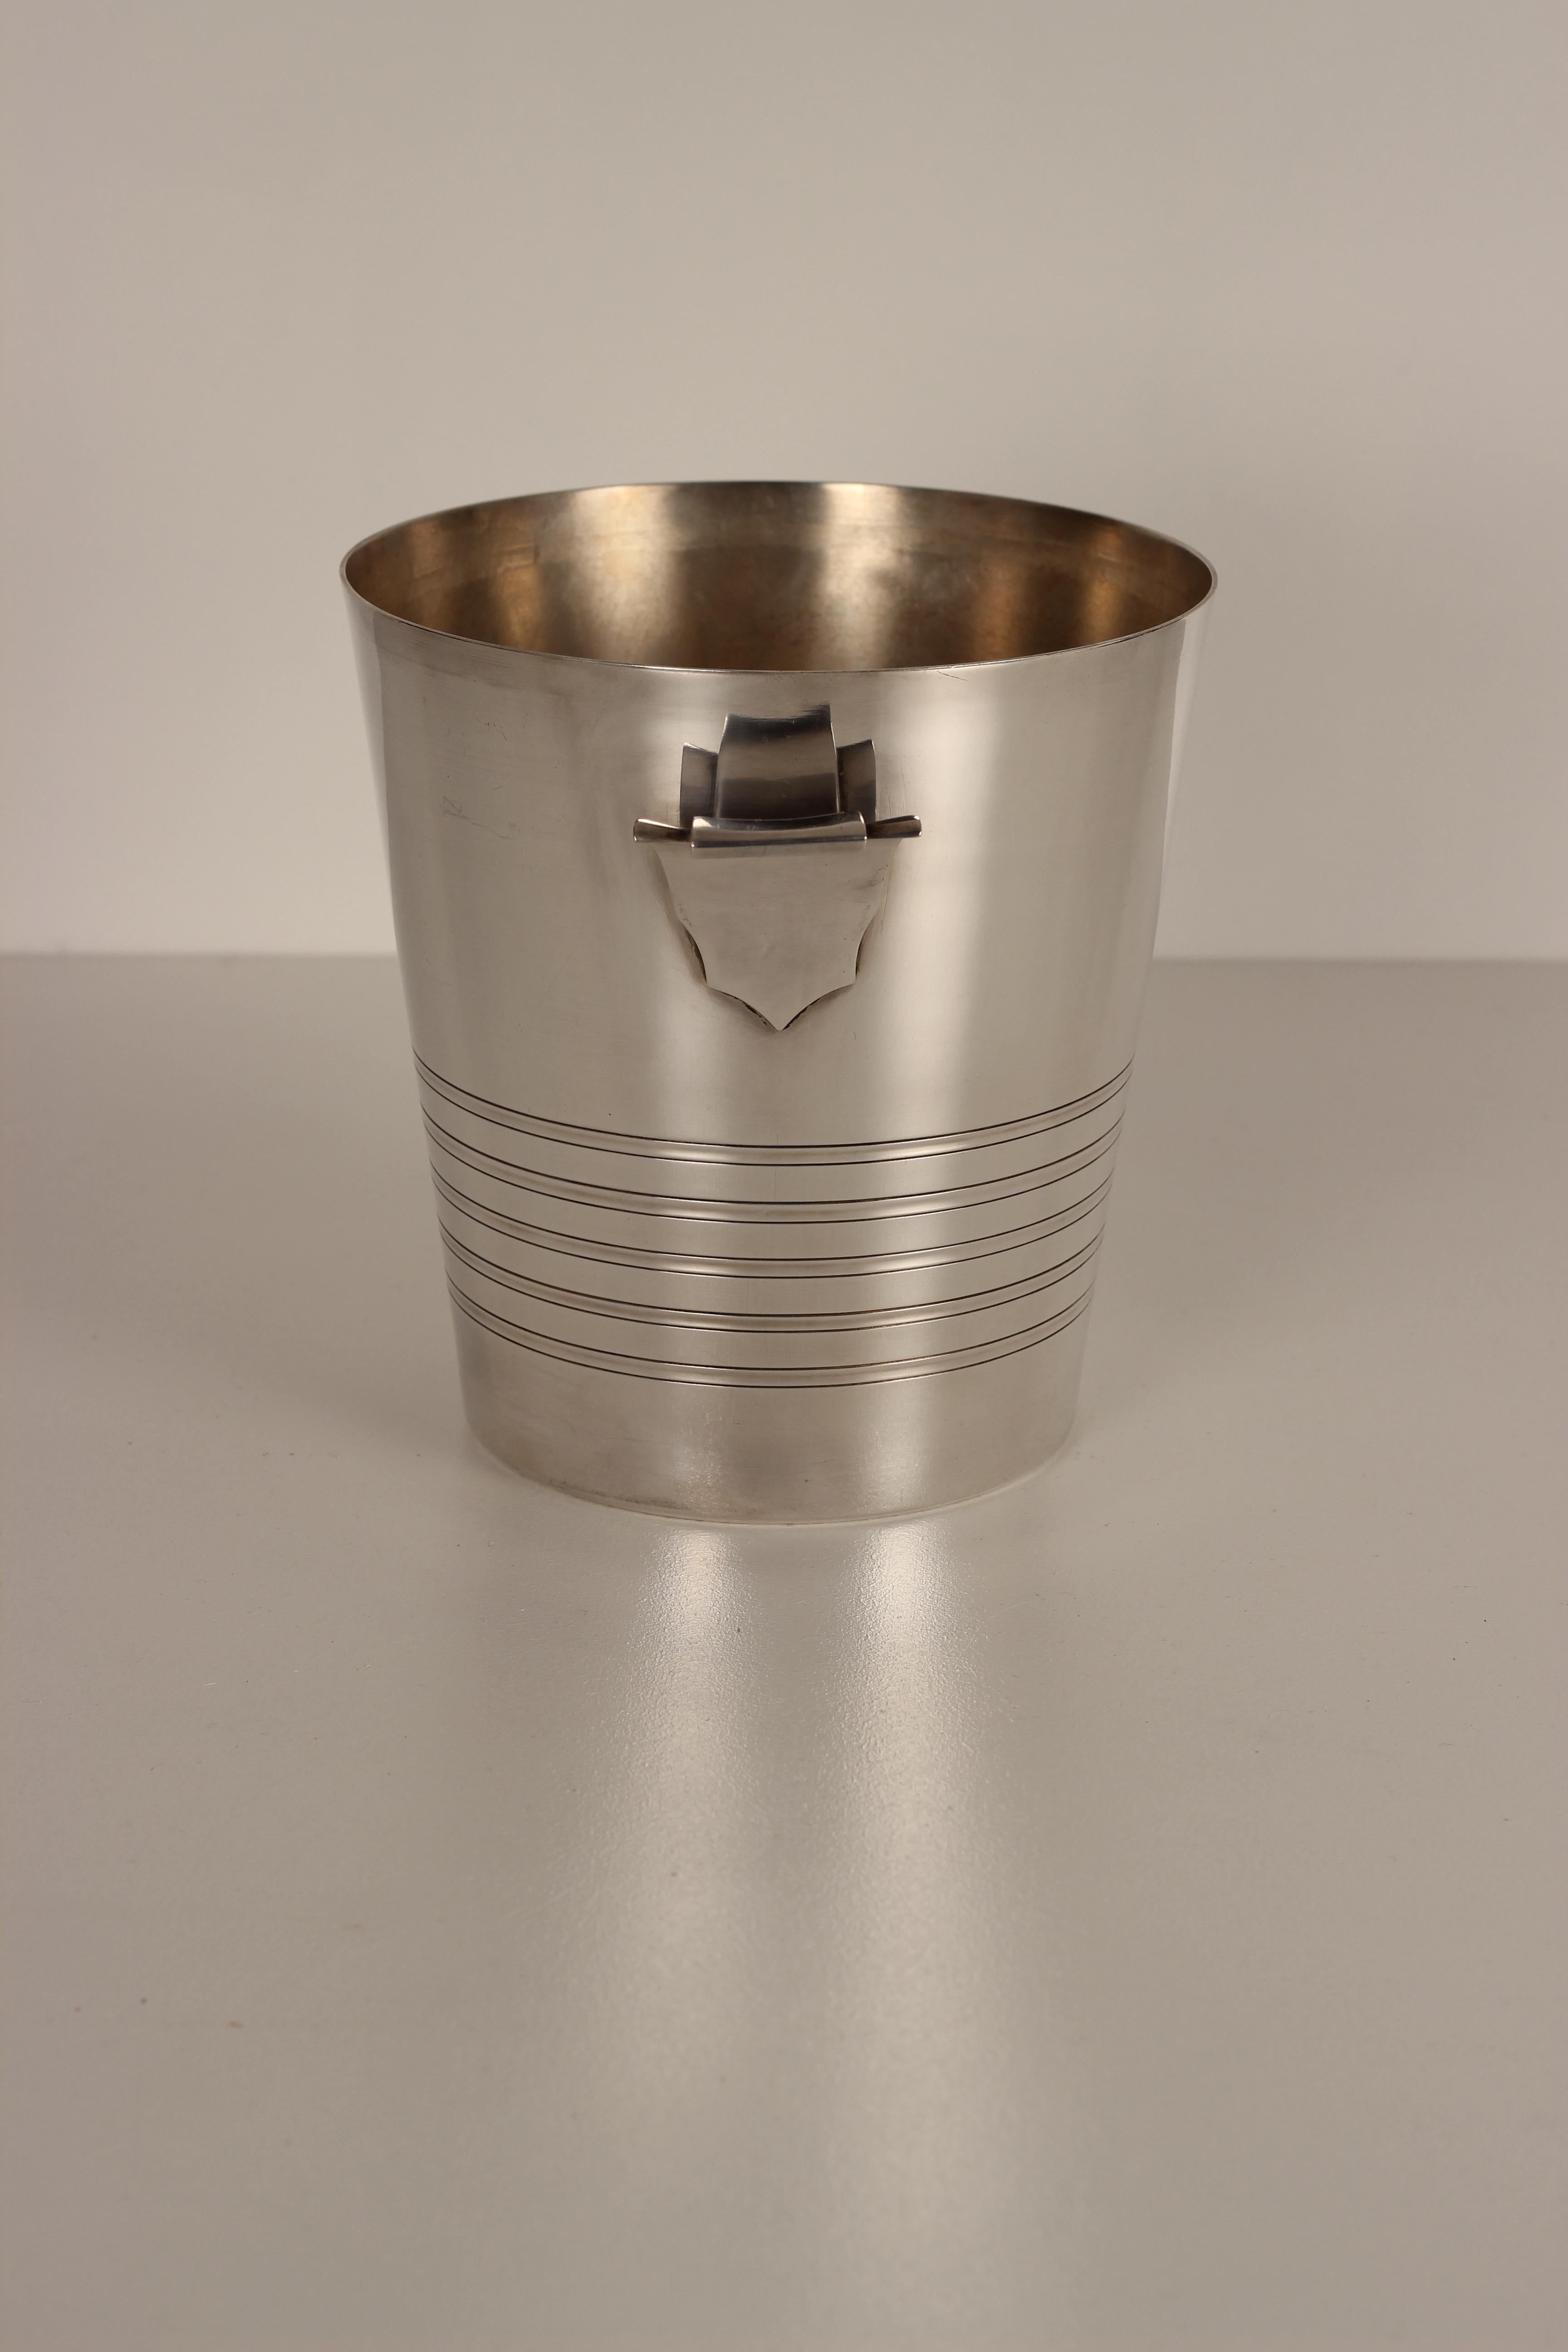 English Art Deco Silver Plated Champagne Bucket or Ice Bucket, 1930’s